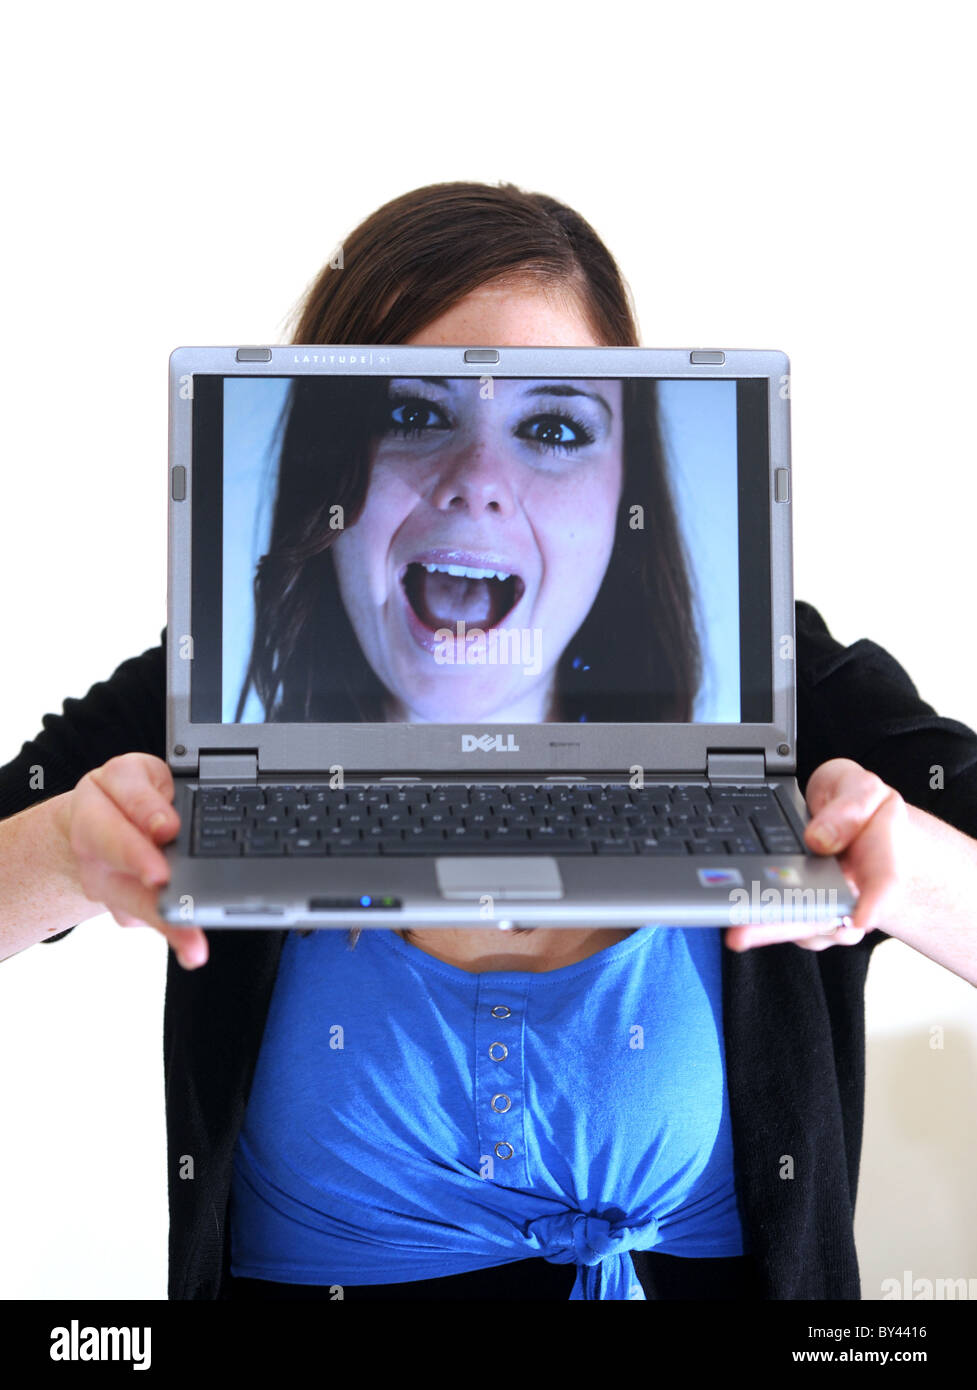 Young woman laughing mouth open using laptop computer with face on screen -  Facebook Stock Photo - Alamy